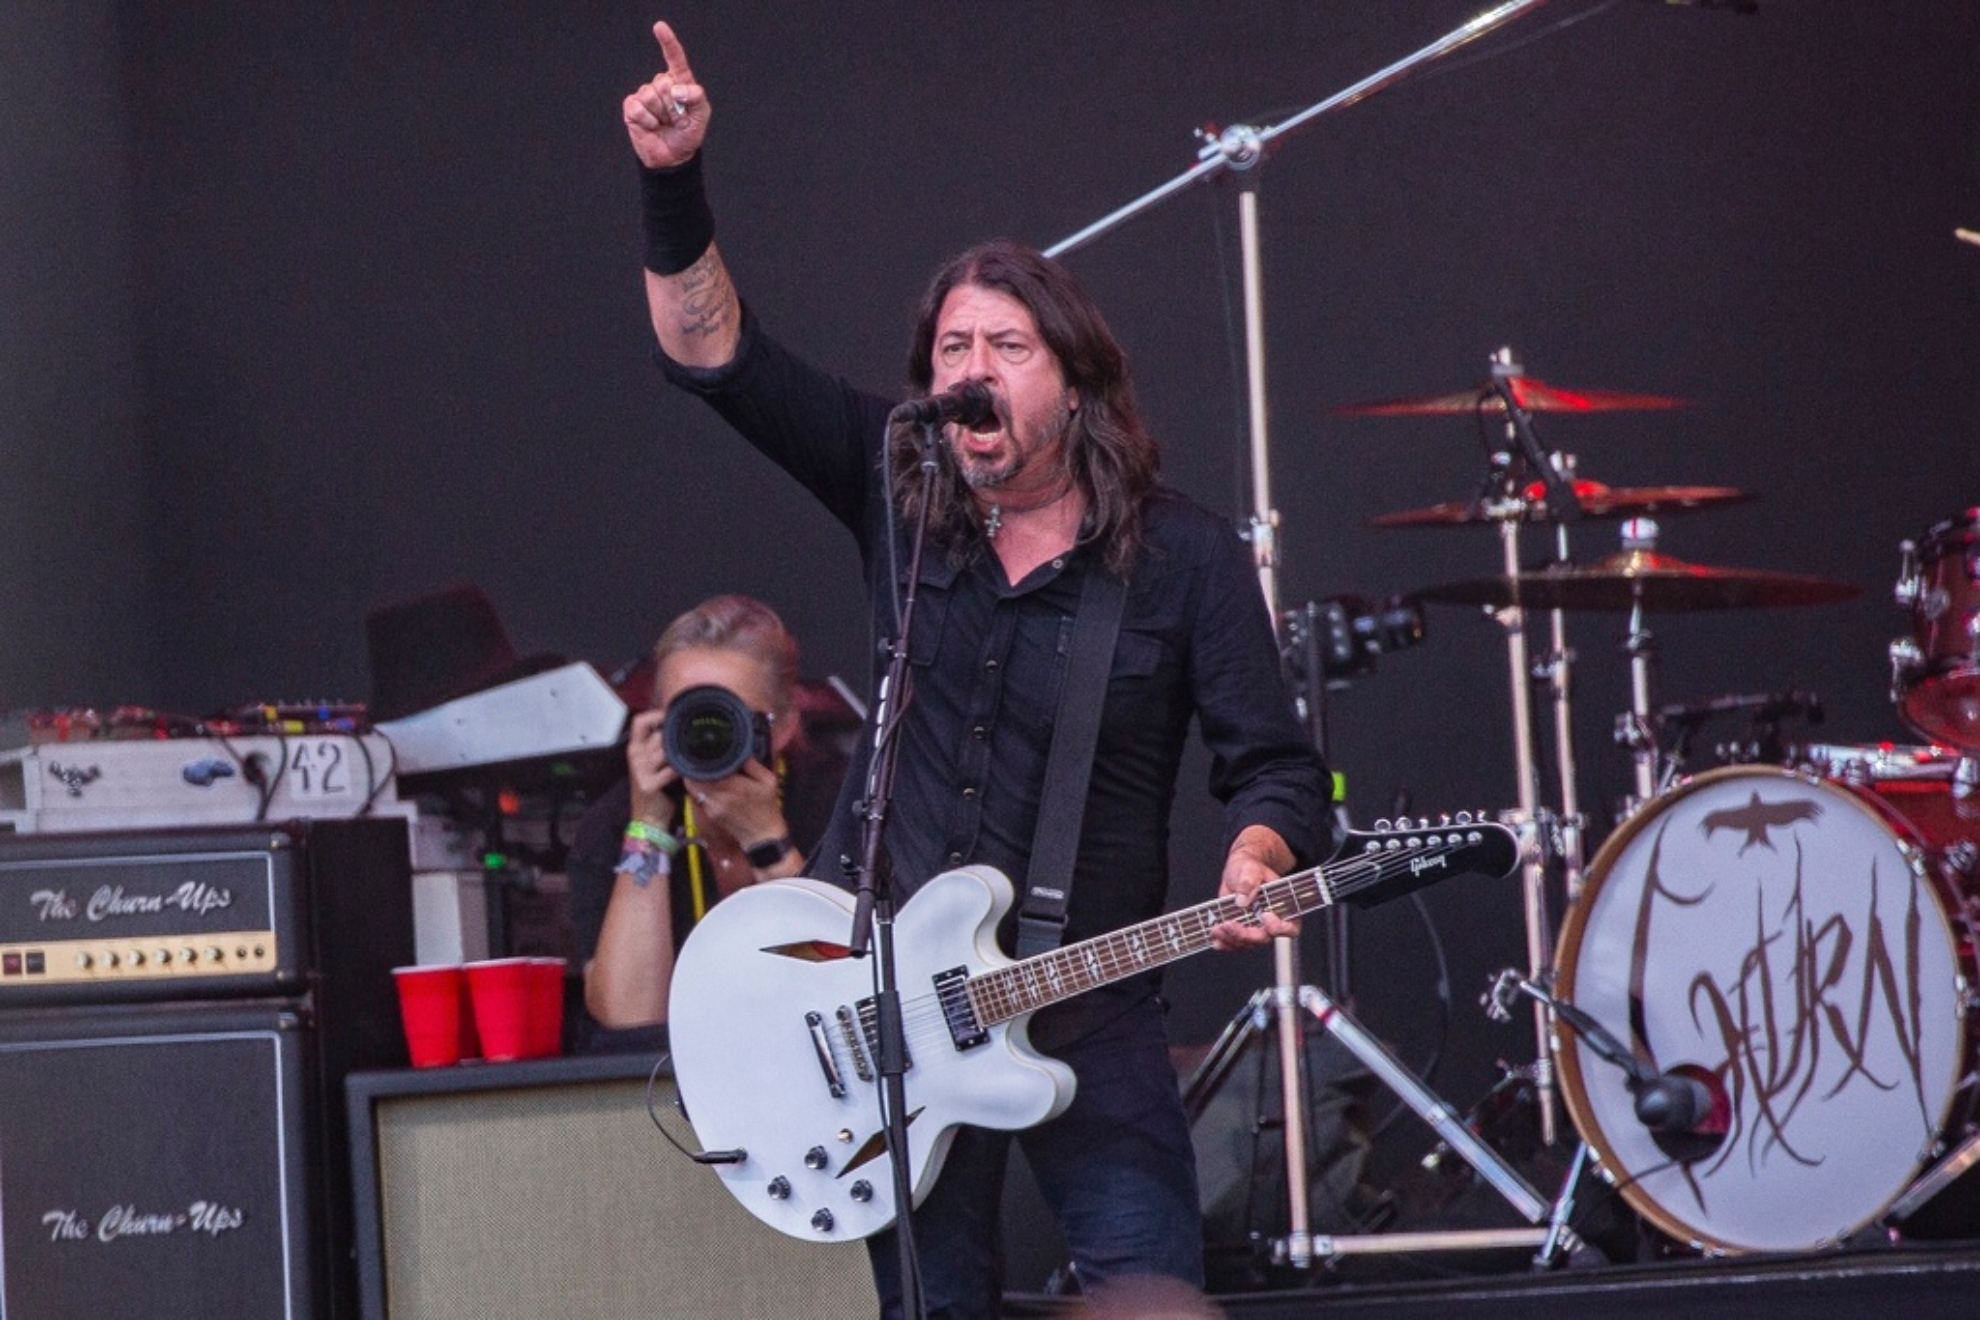 Foo Fighters surprise everyone at Glastonbury playing under a different name with special guests and a new drummer